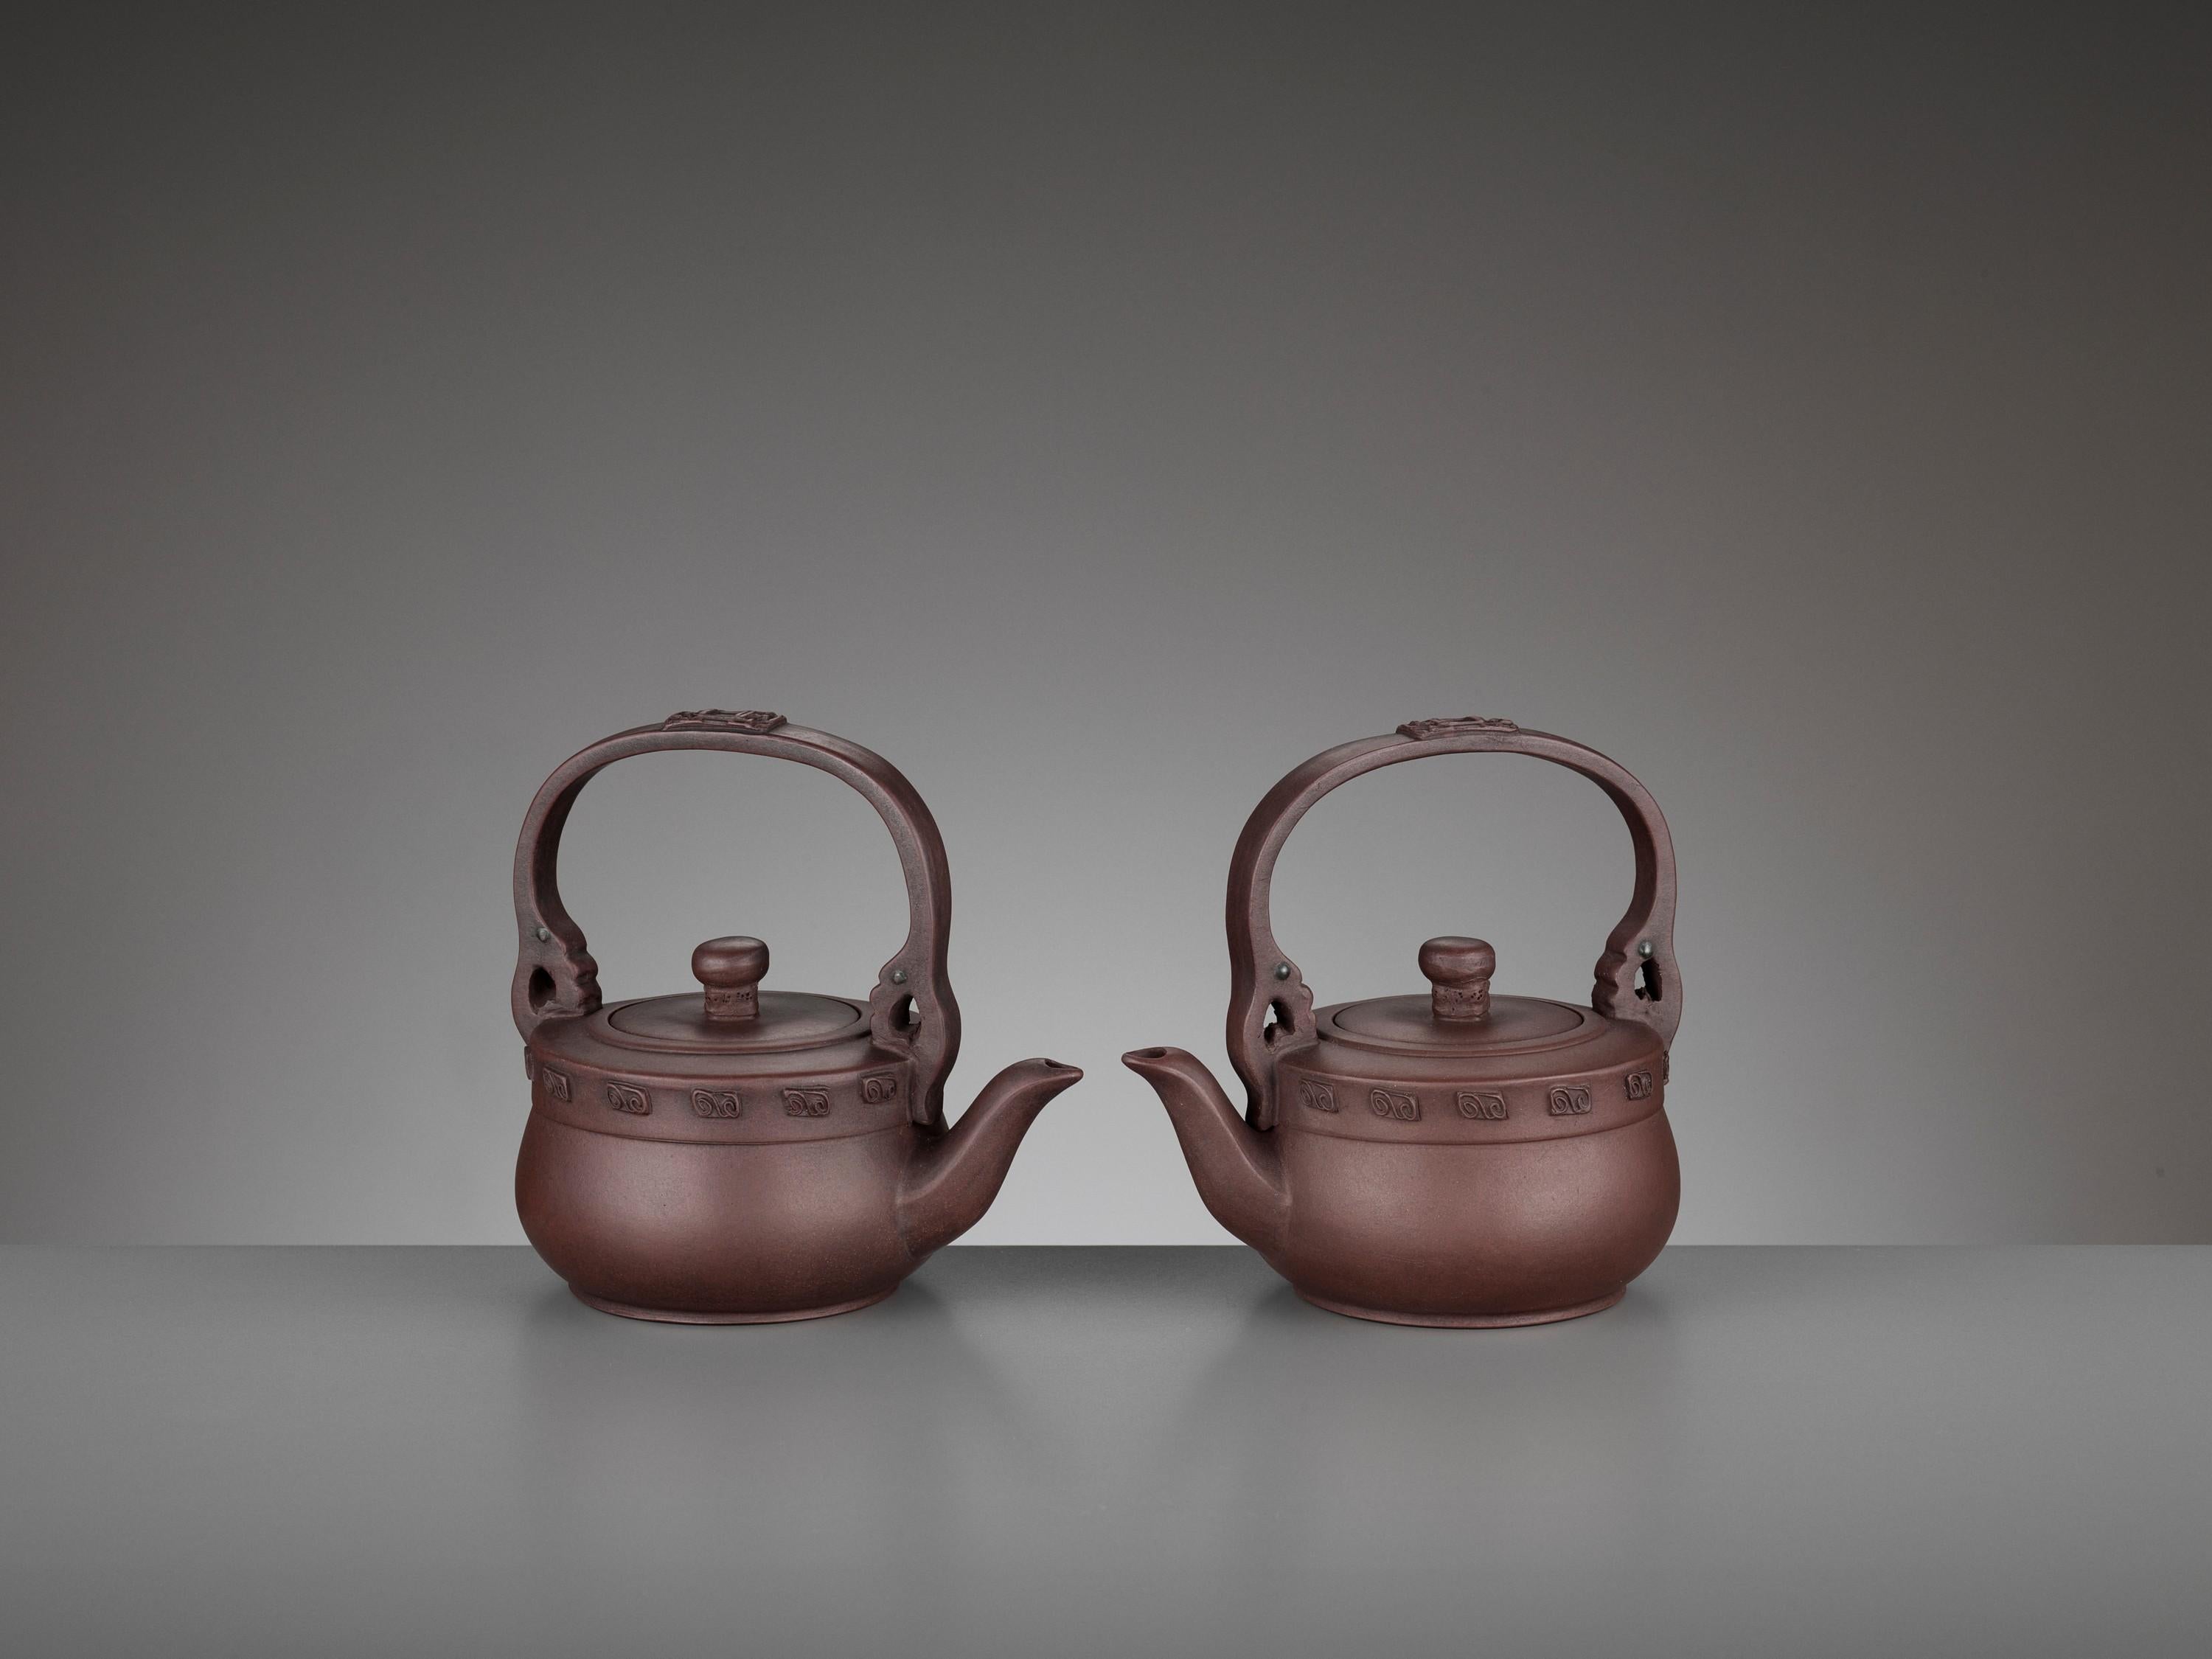 Pair of Yixing teapots, Signed Qian Hongxian, China, 20th century

Each with an arched loop handle above the cover decorated with a geometric design in relief, an elegantly curved spout, and a circular cover with a central pierced knop, the